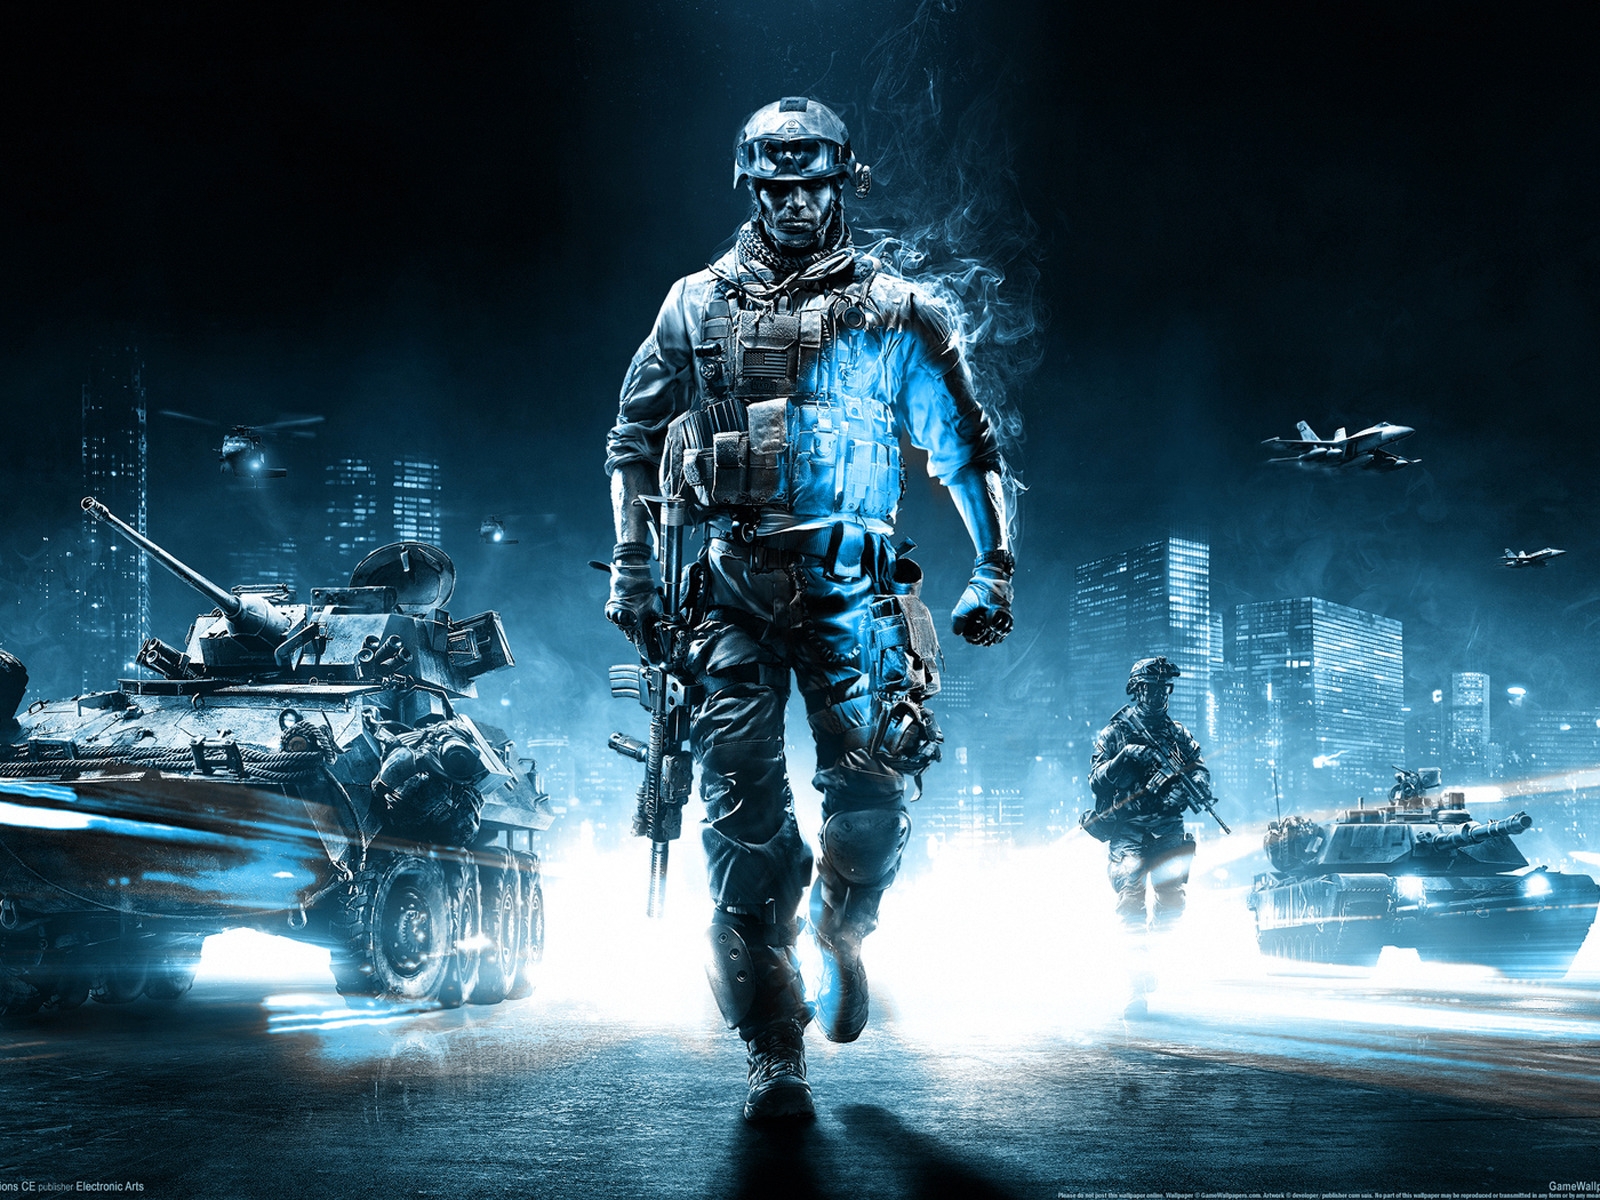 Battlefield 3 Action Game for 1600 x 1200 resolution